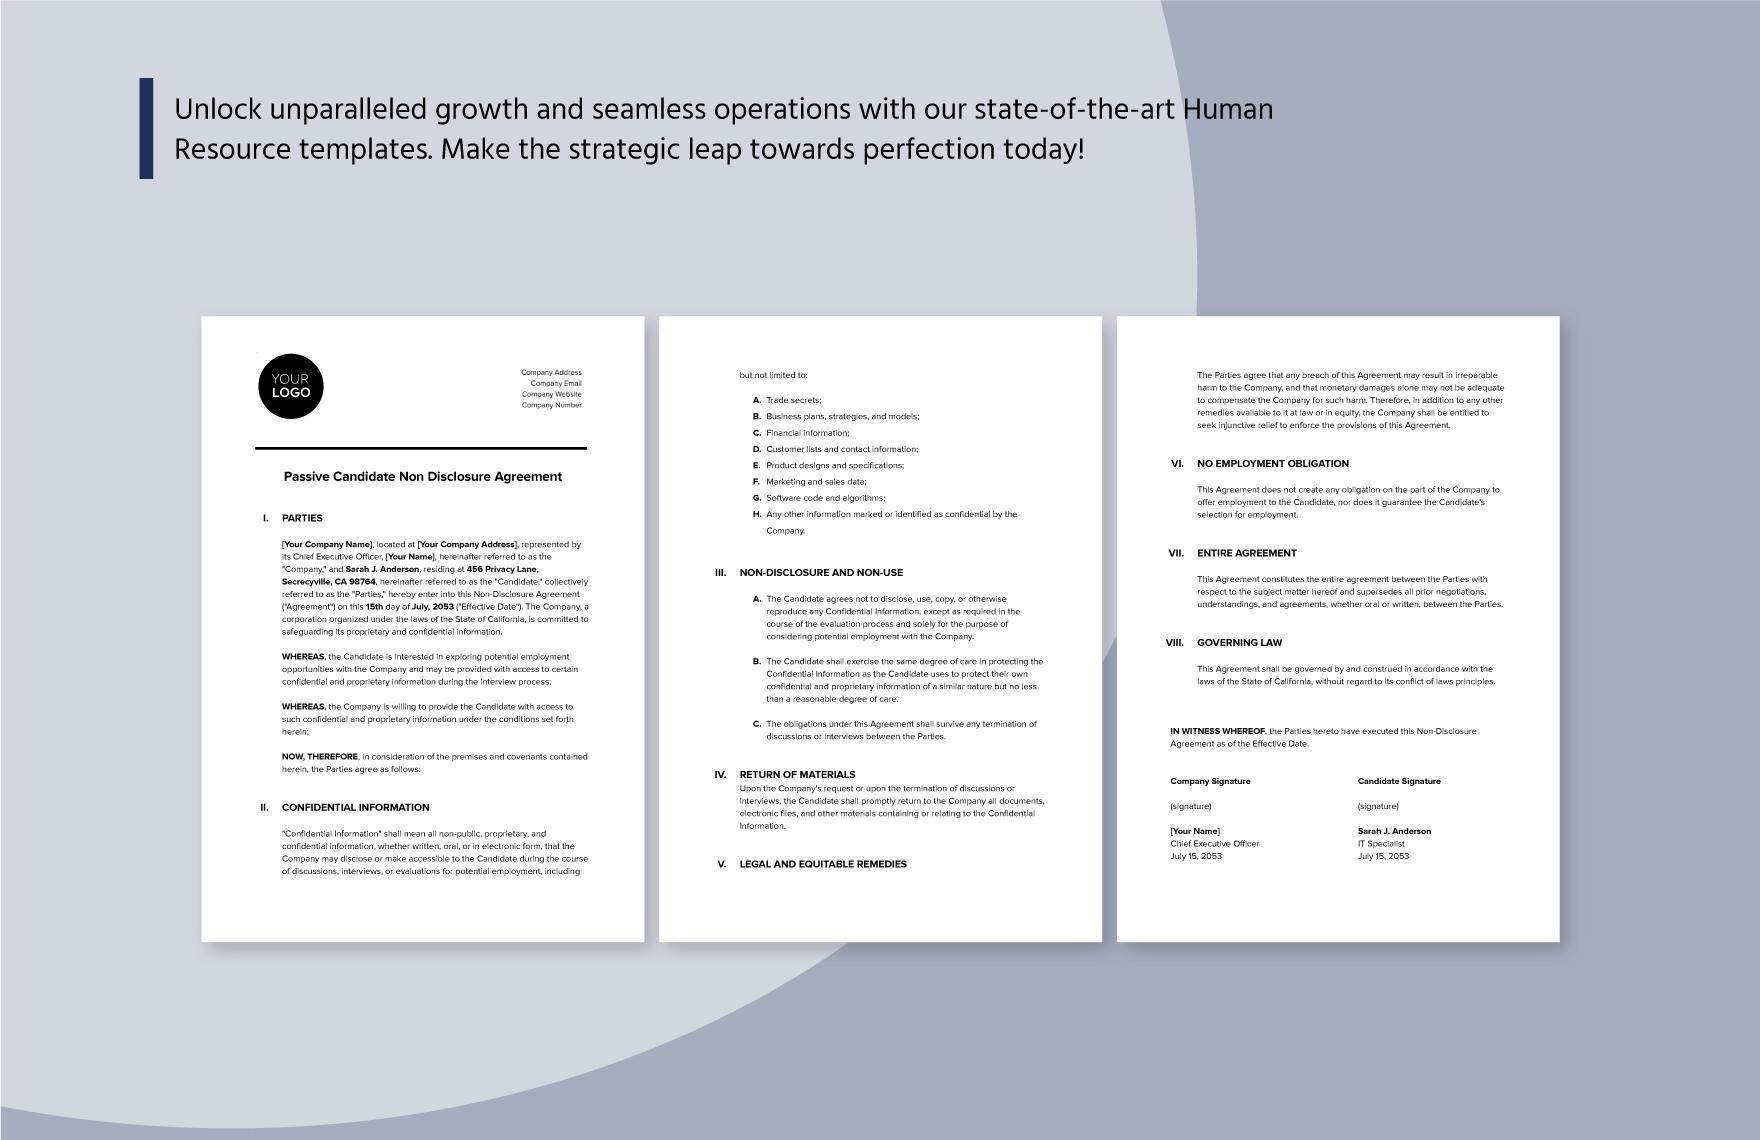 Passive Candidate Non Disclosure Agreement HR Template